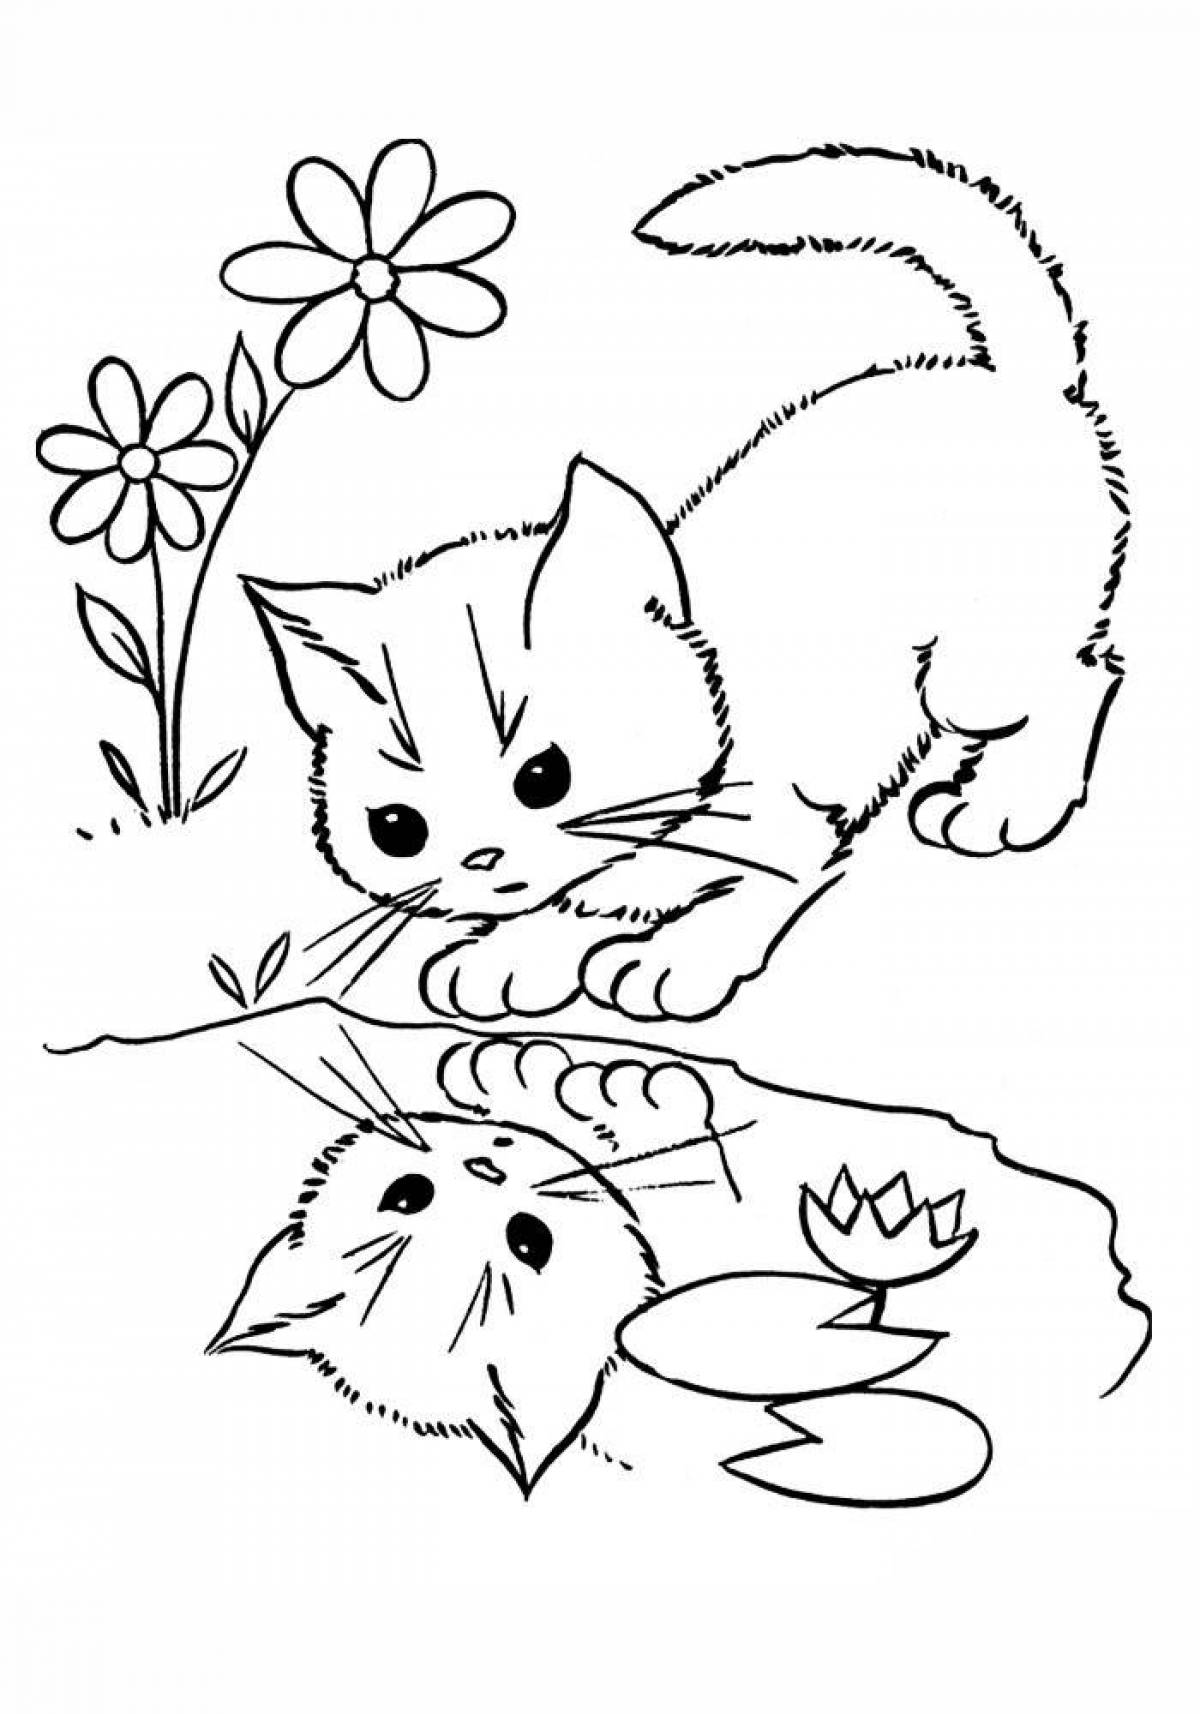 Animated kitten coloring pages for kids